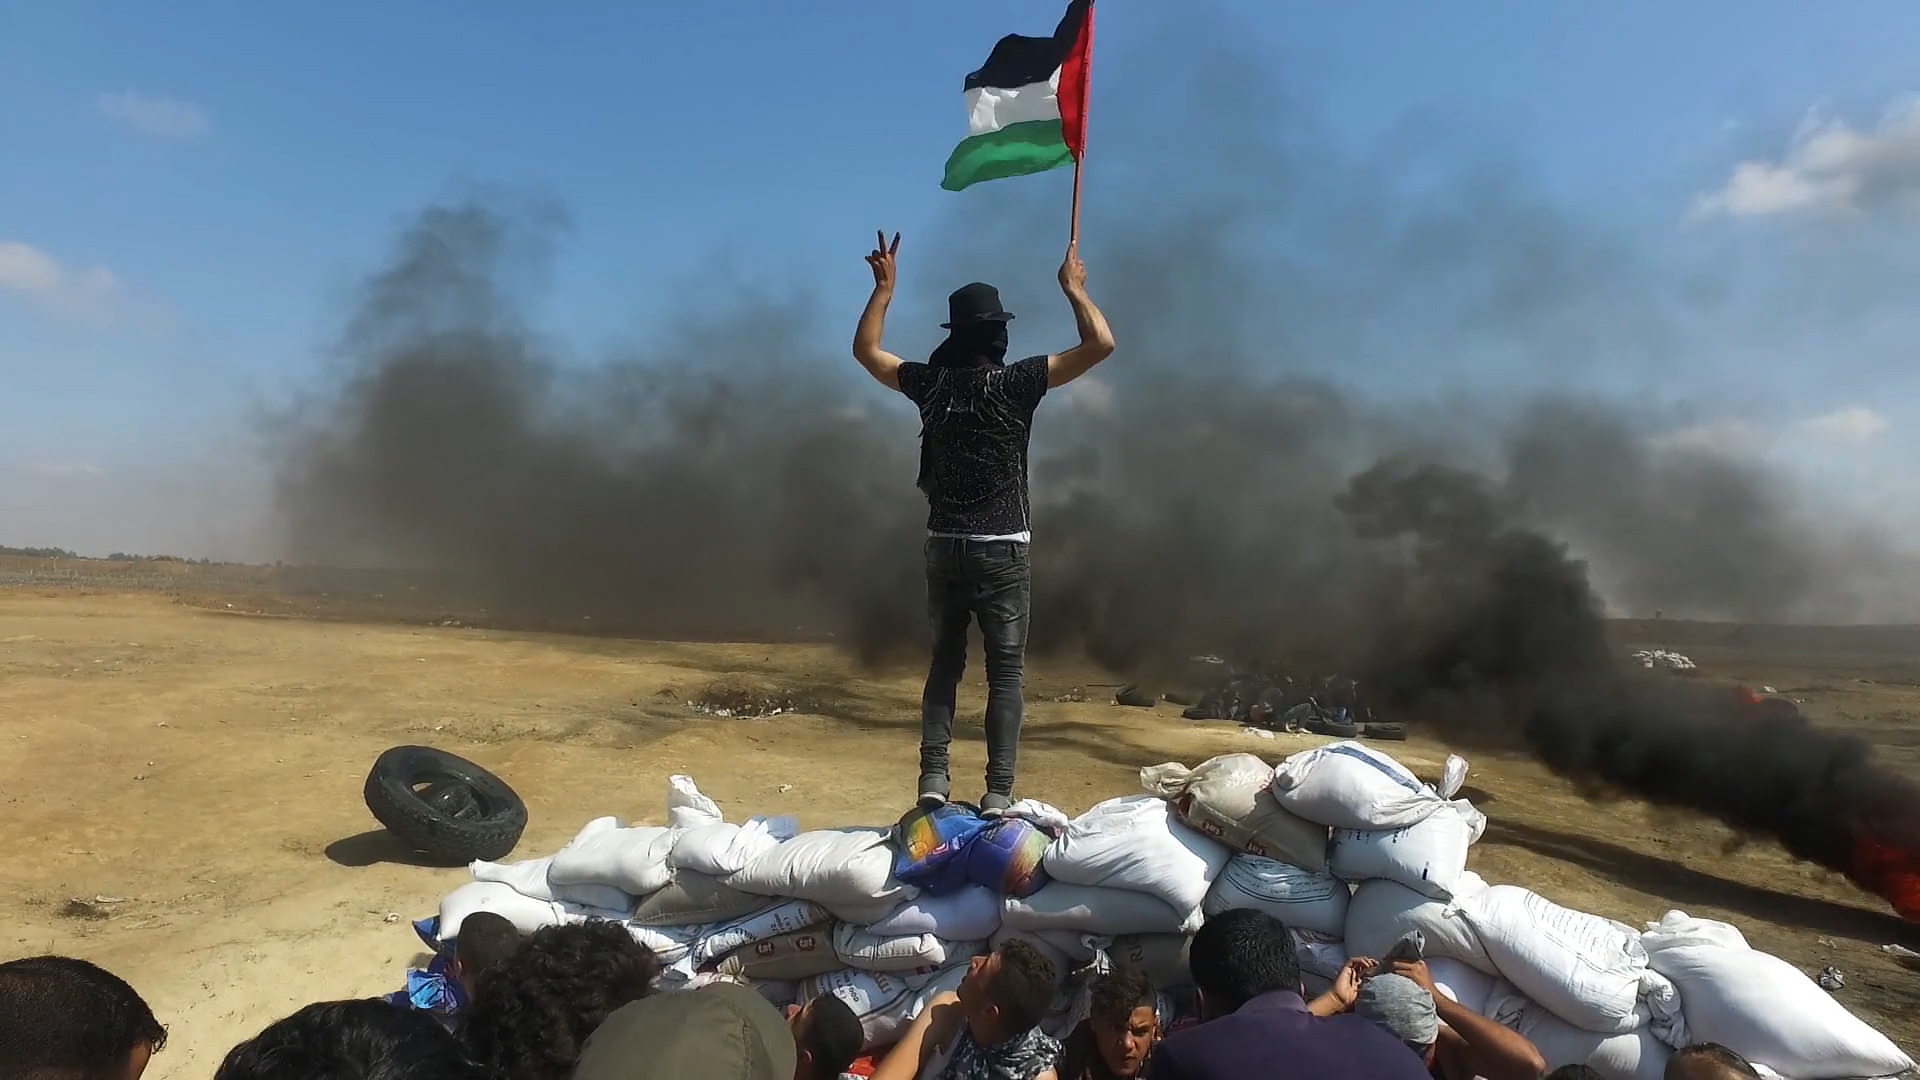 We are screening this double bill of two fascinating films about Gaza's 2018 March of Return protest movement twice.  At the second screening (on May 1st) there will be a Q&A facilitated by Juman Quneis, a Palestinian Filmmaker and teacher of journalism.